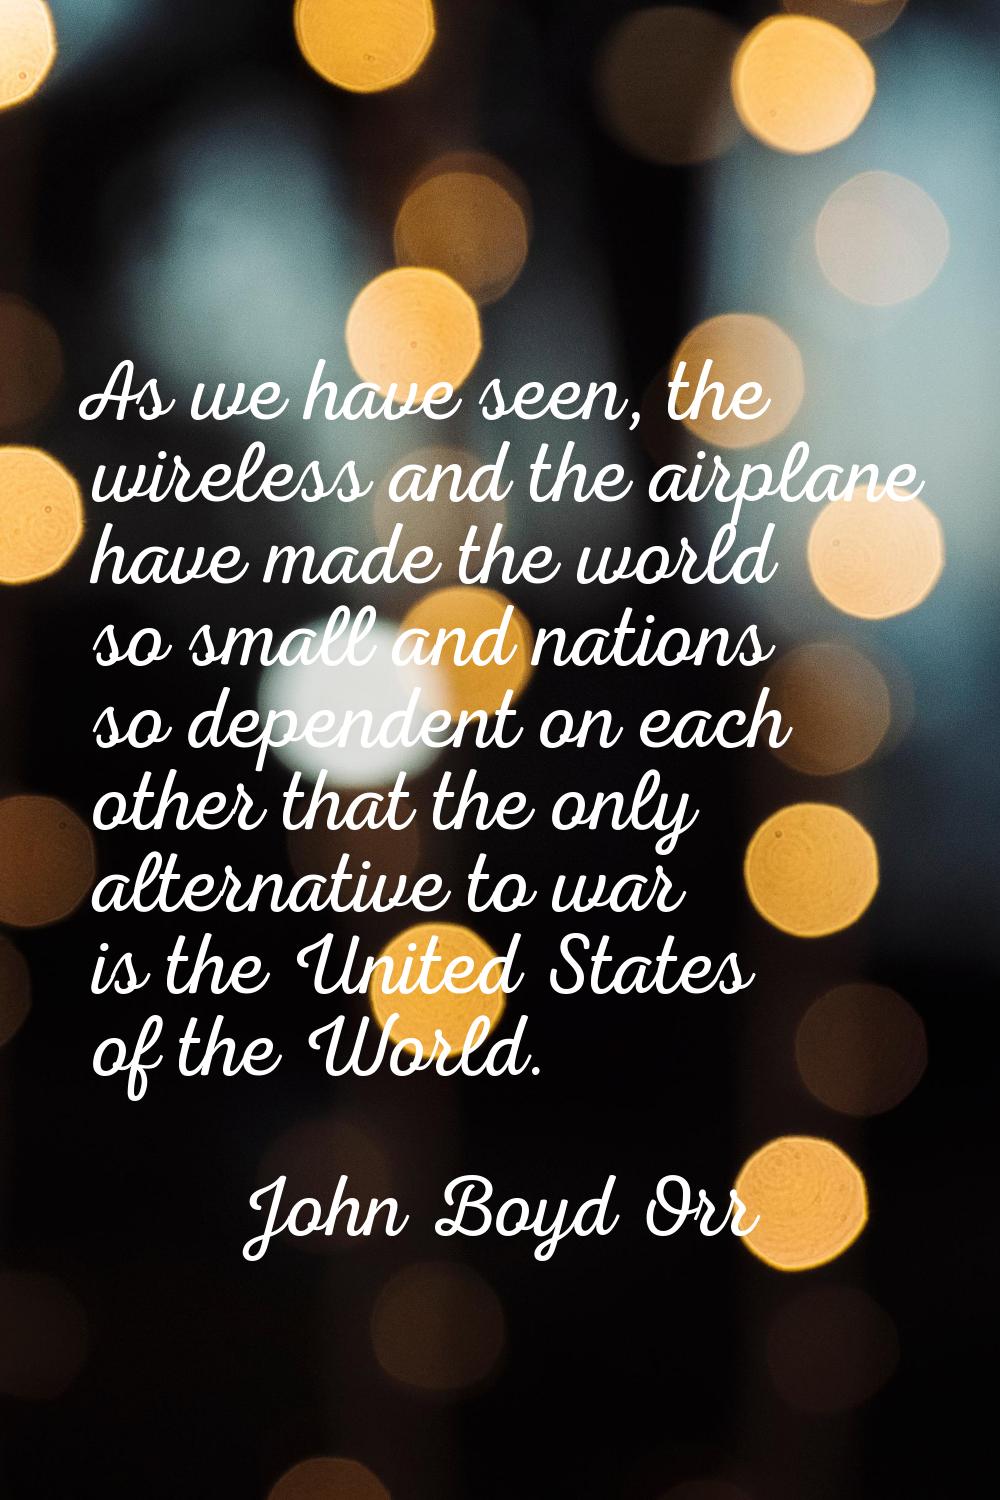 As we have seen, the wireless and the airplane have made the world so small and nations so dependen